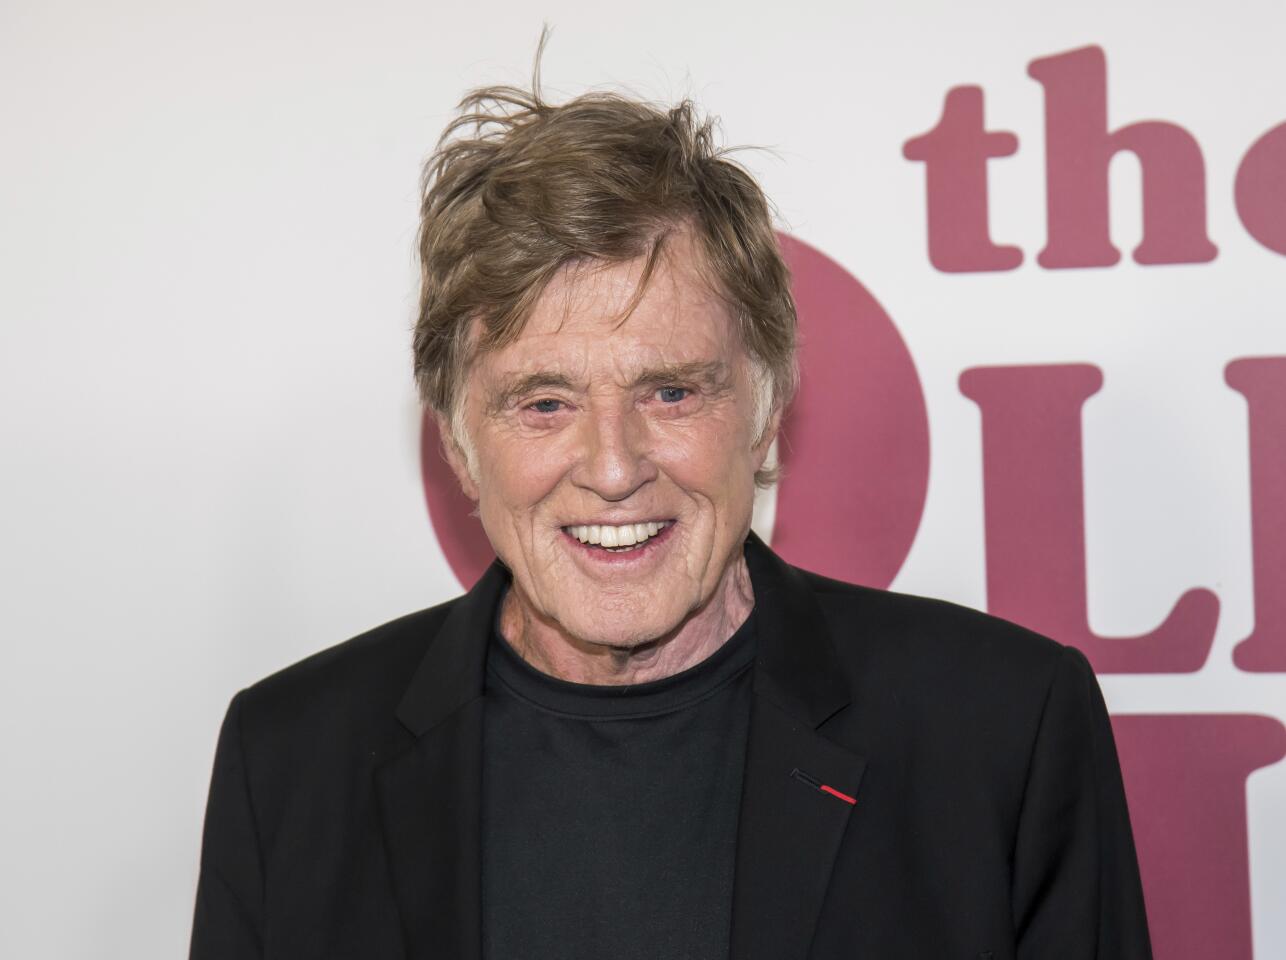 Robert Redford attends the premiere of "The Old Man and the Gun" at the Paris Theater on Thursday, Sept. 20, 2018, in New York. (Photo by Charles Sykes/Invision/AP)